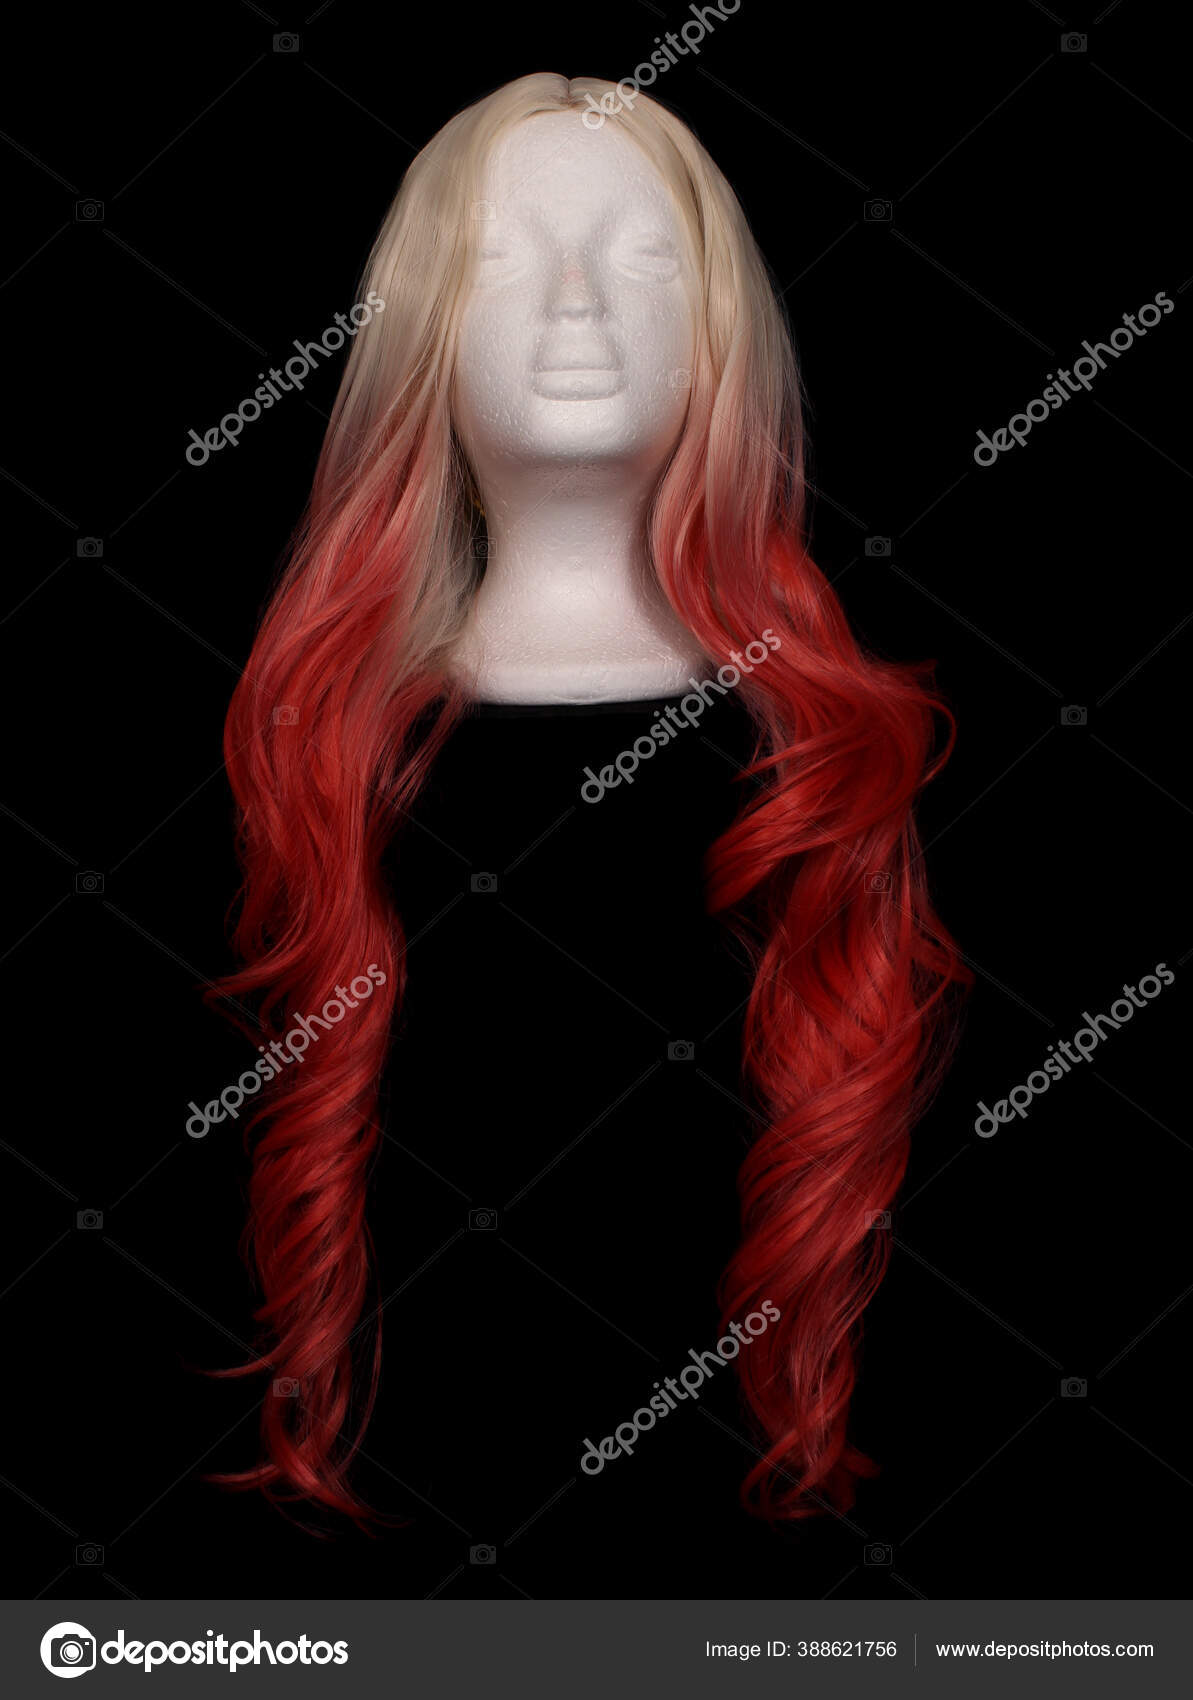 Blond Orange Ombre Wig Mannequin Head Stock Photo by ©Marti157900